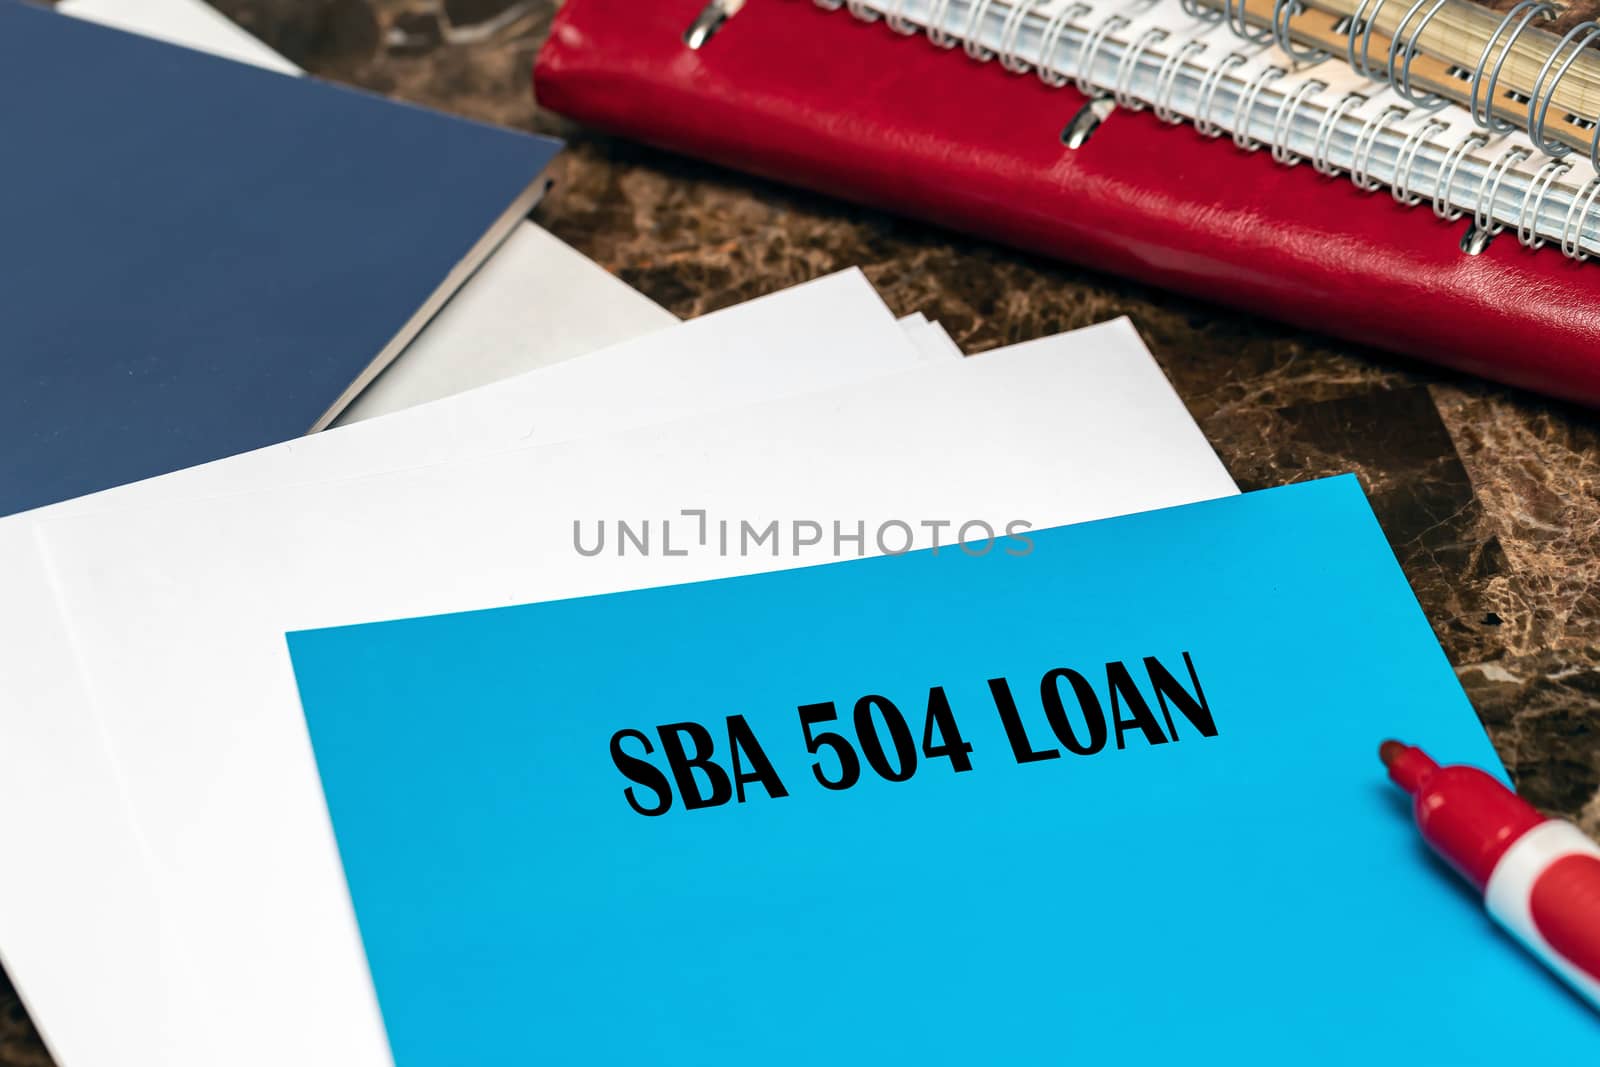 SBA 504 loans provide long-term financing for small businesses to purchase real estate, equipment, and other fixed assets.